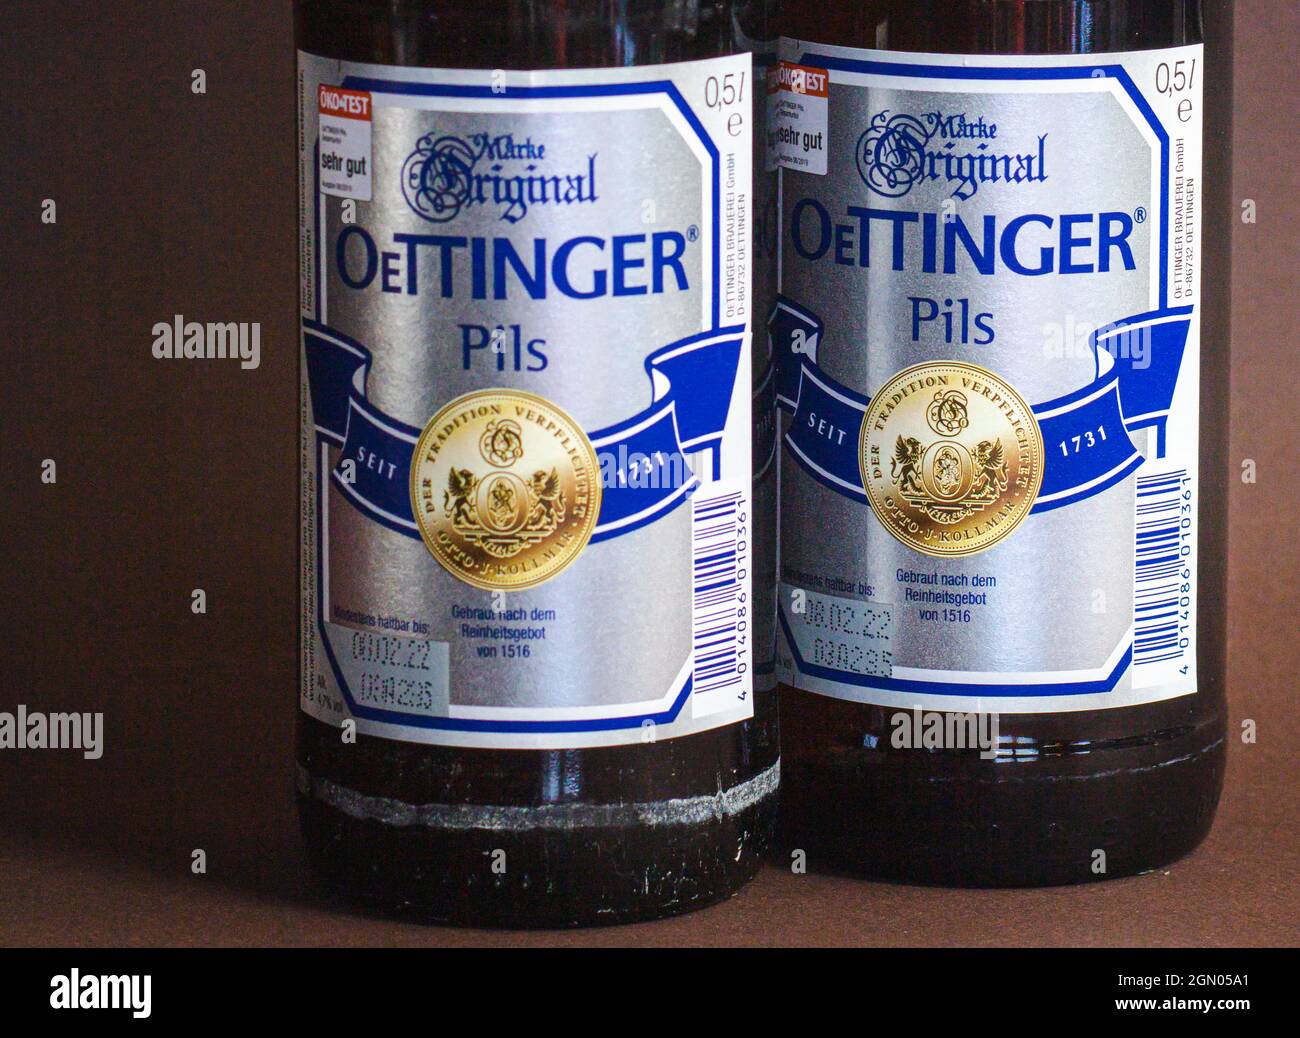 Neckargemuend, Germany - September 13, 2021: two labels of oettinger brand pilsner beer, best selling german brewery group with focus on right bottle. Stock Photo